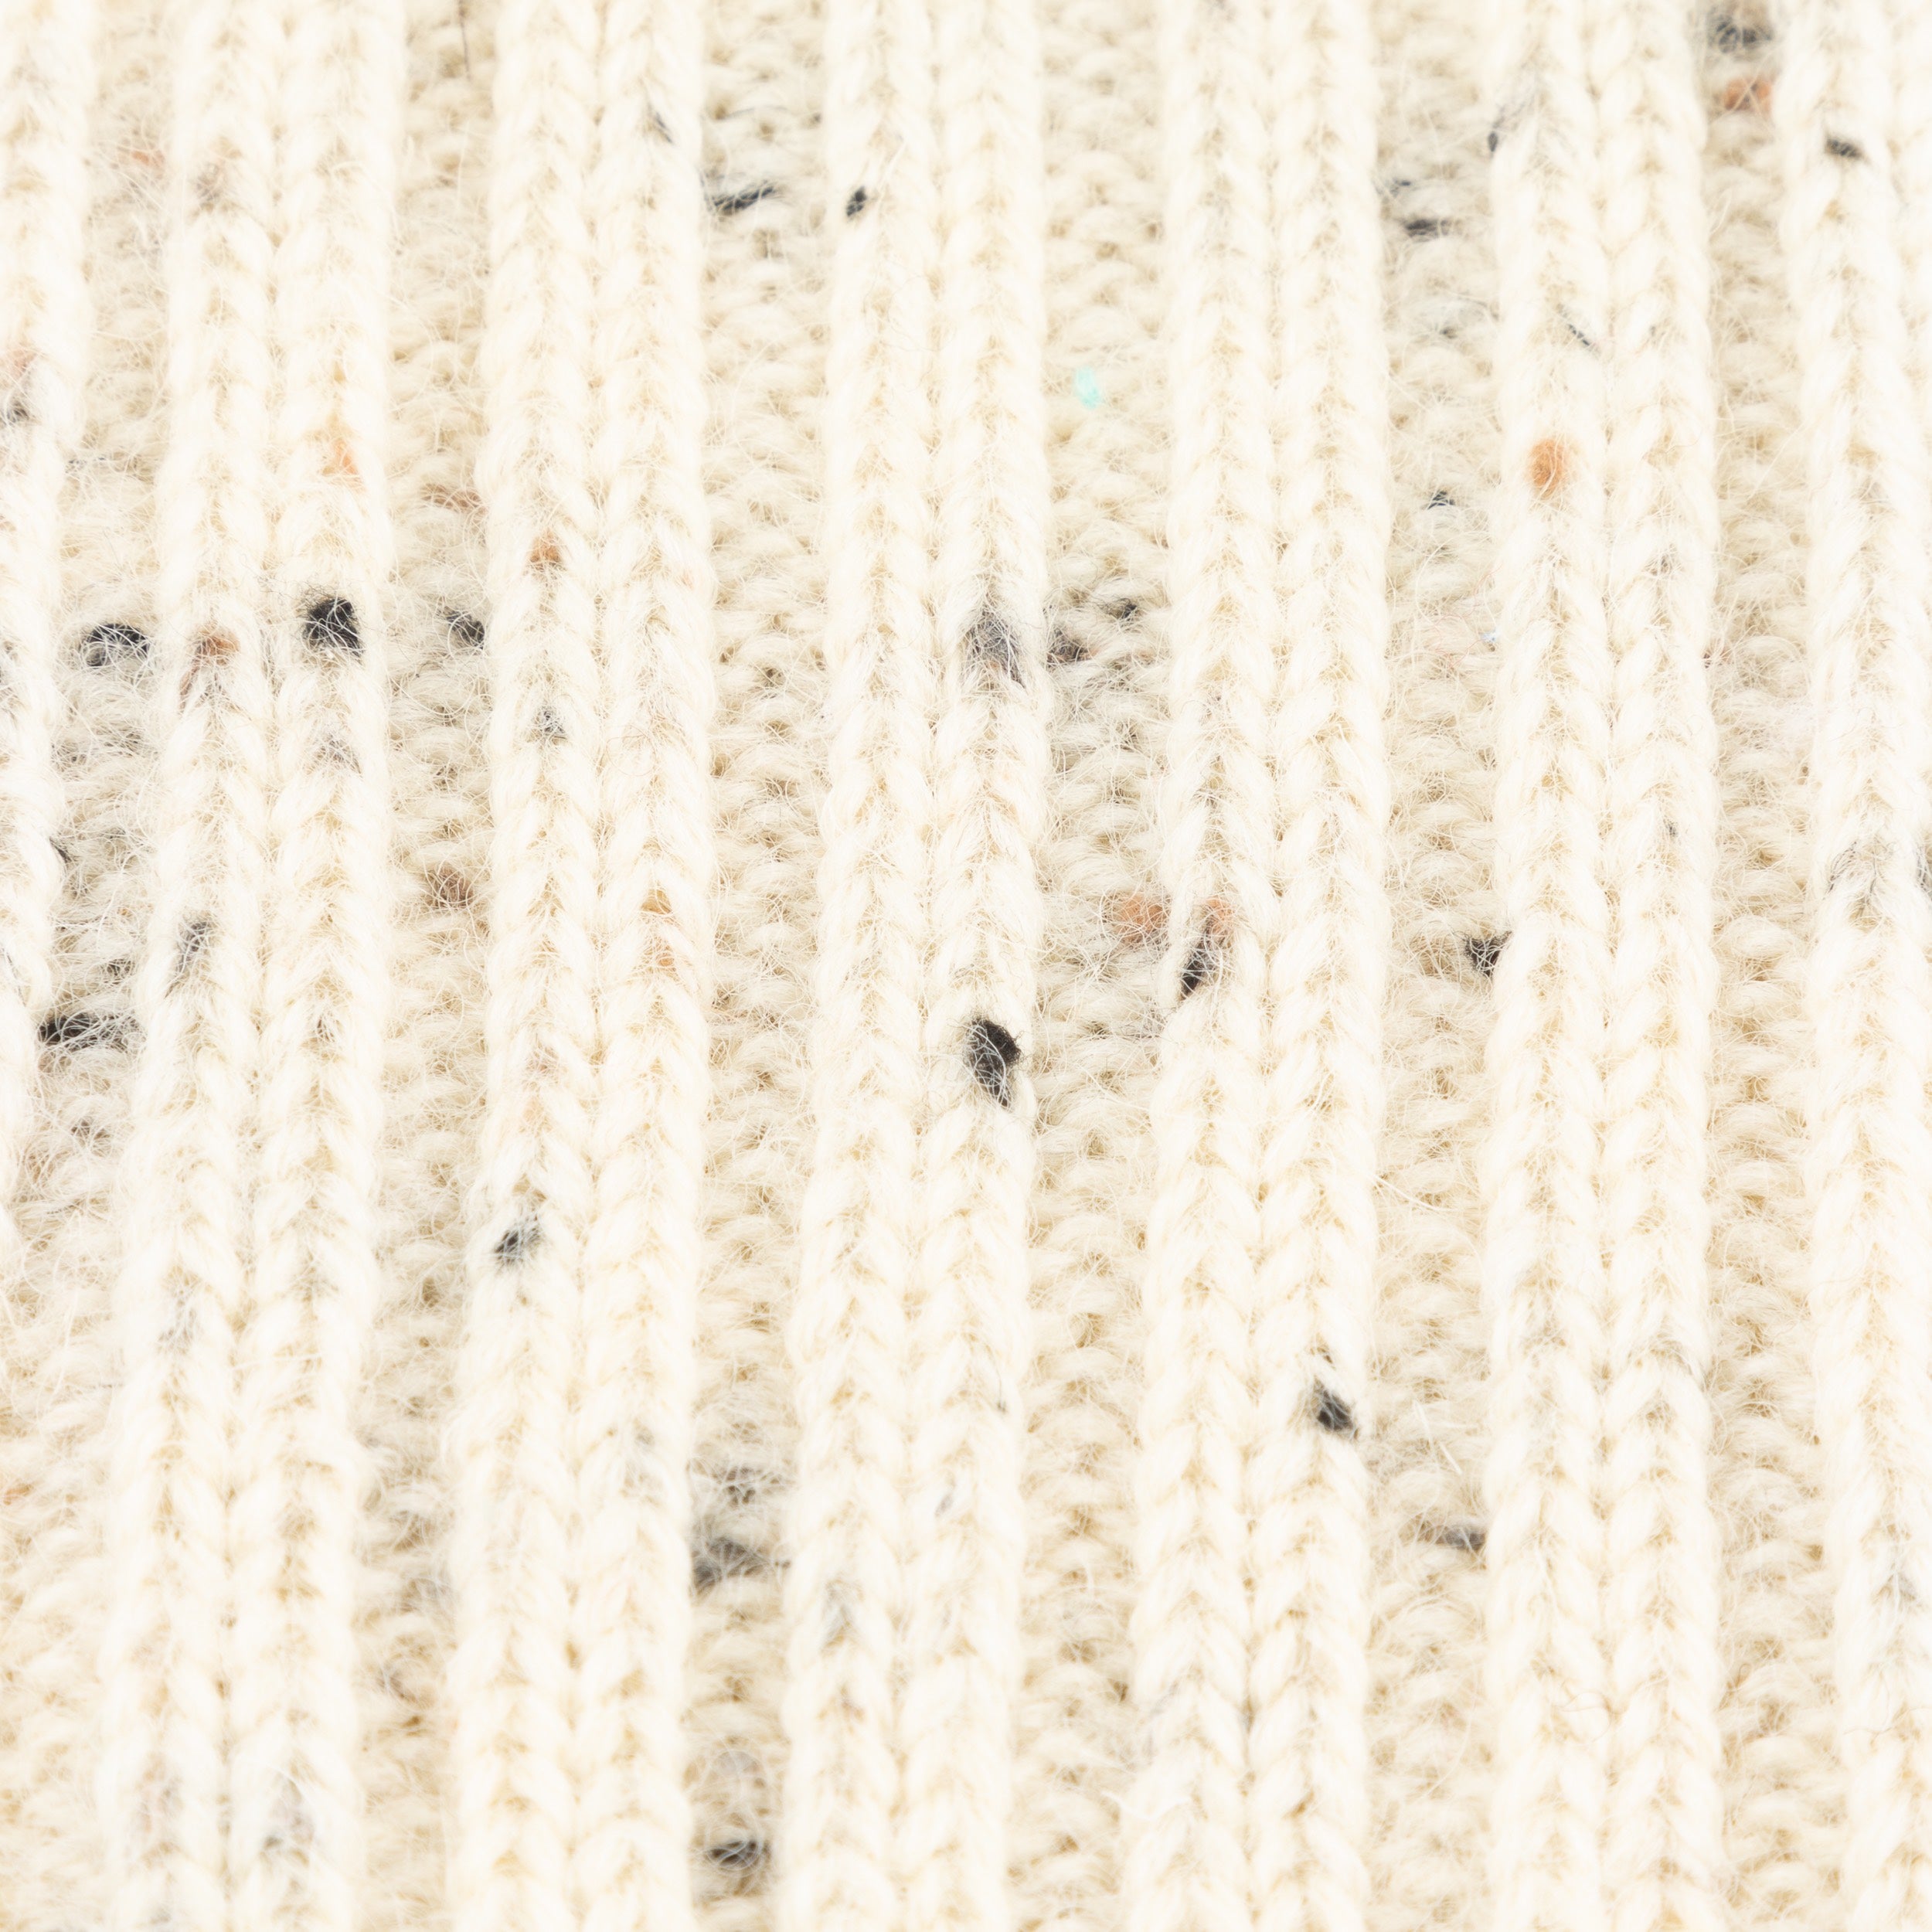 Close up of the Carrier Company Men's Wool Socks in Aran Nep